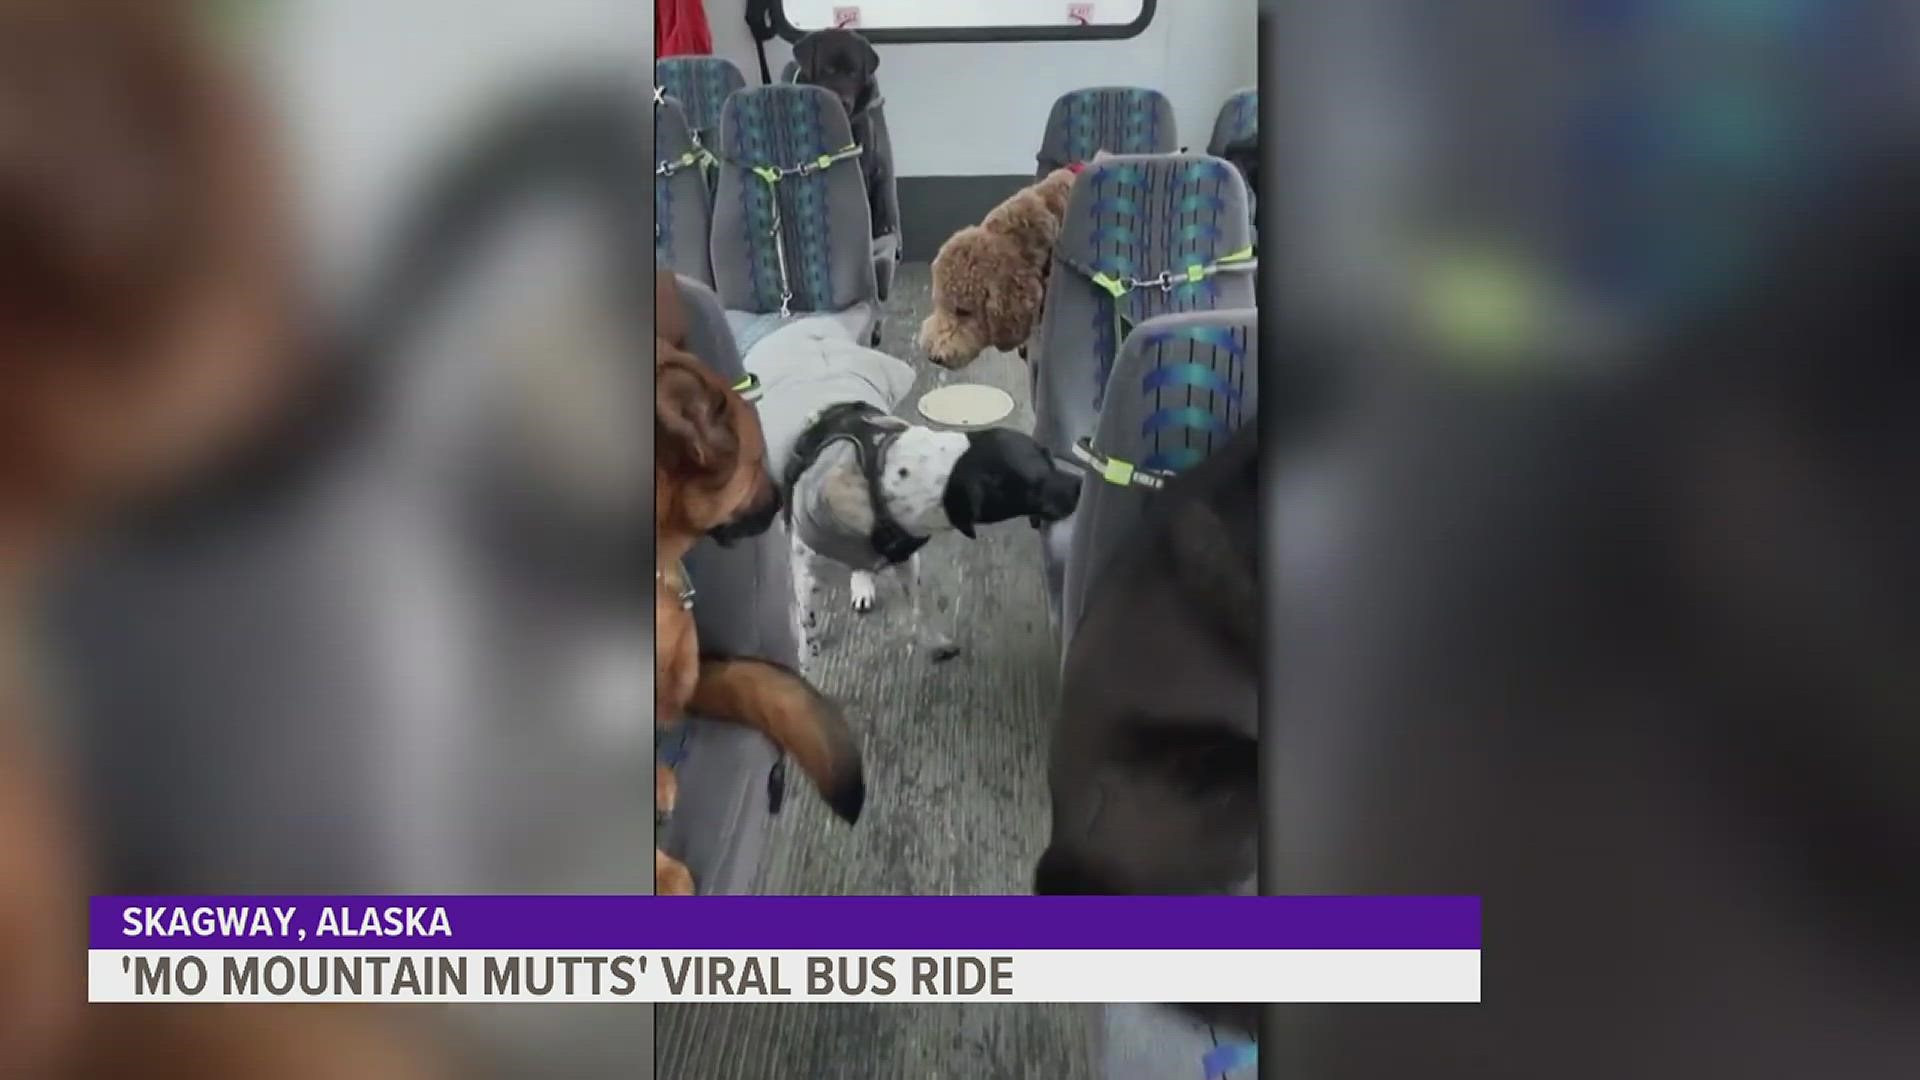 It's a bus ride from heaven: the Mo Mountain Mutts dog walking business in Alaska went viral on TikTok after sharing clips of their daily dog walks and bus rides.